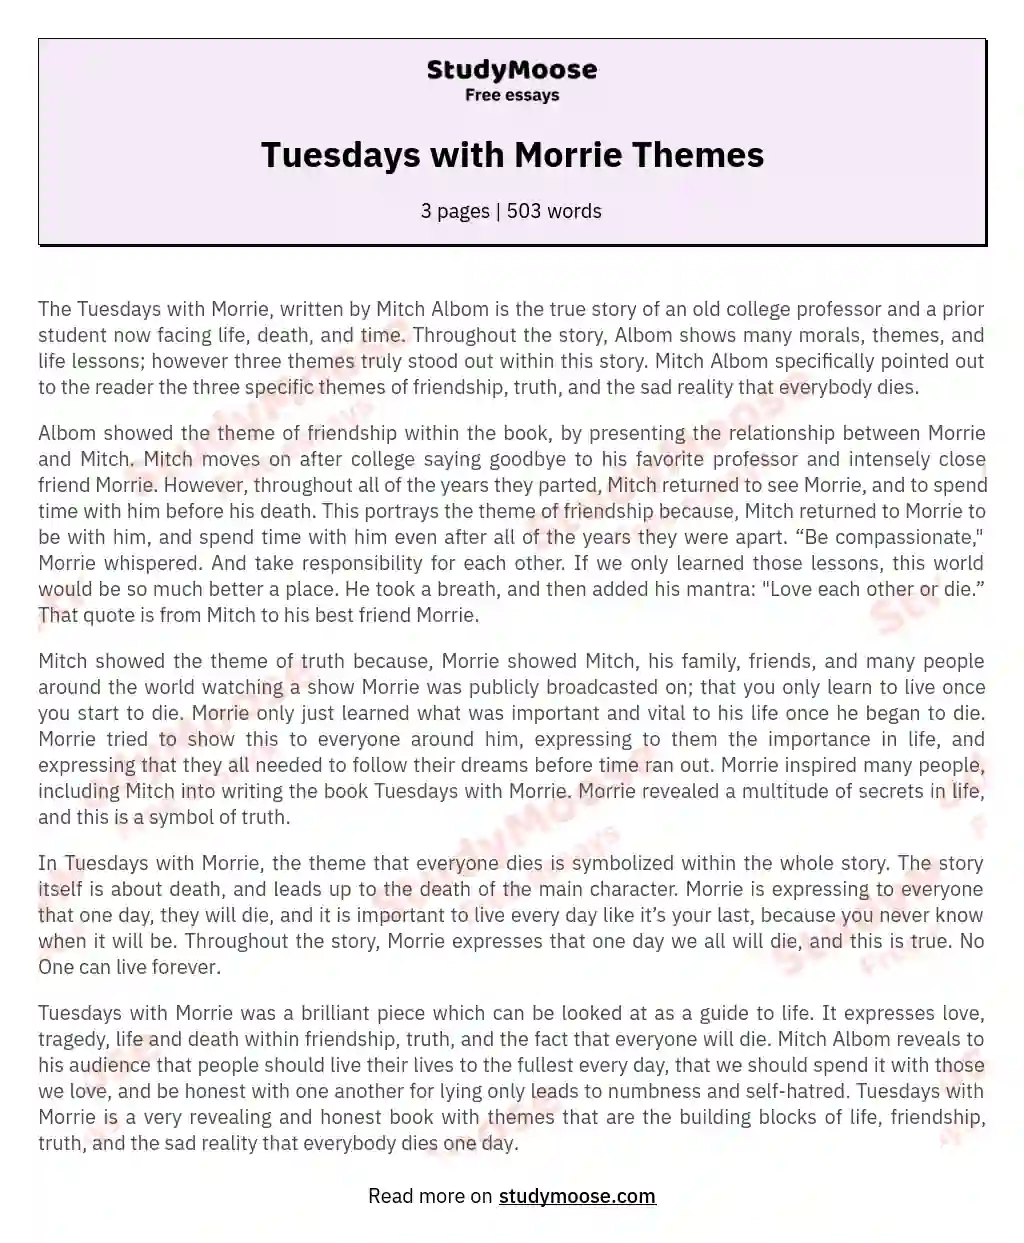 Tuesdays with Morrie: A Profound Exploration of Life's Lessons essay